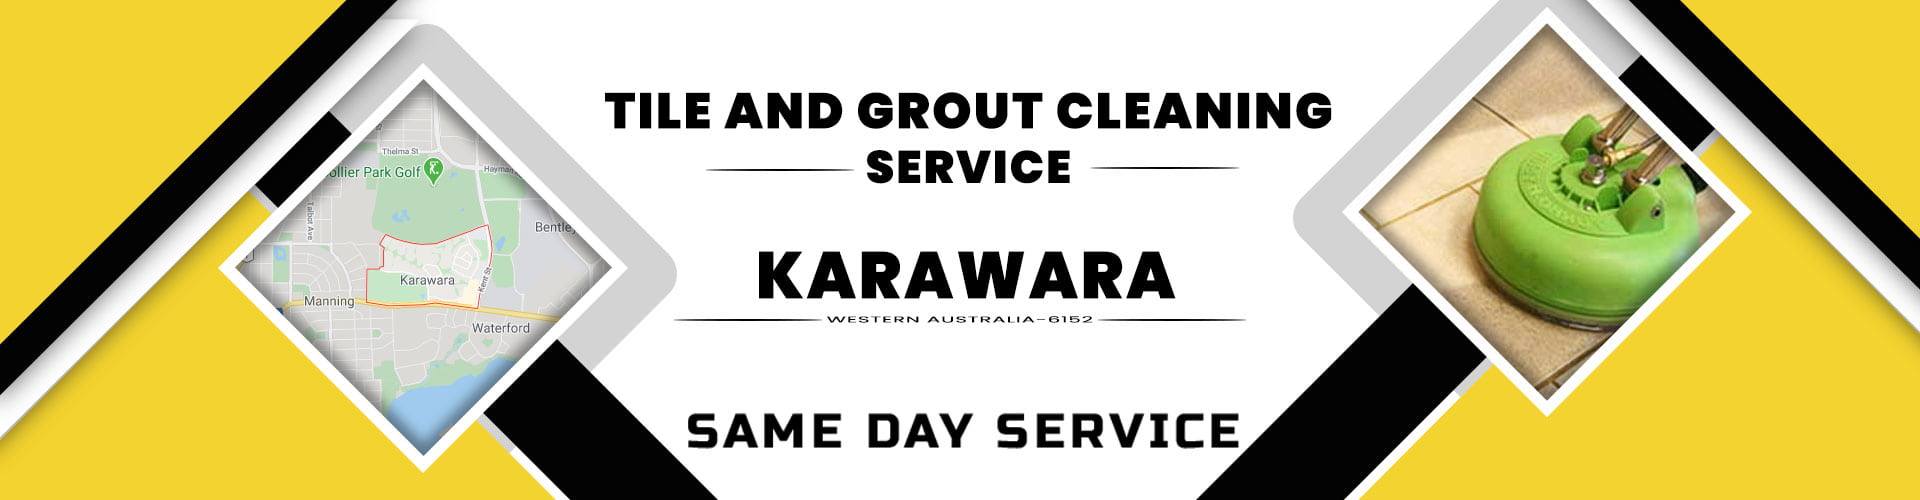 TILE AND GROUT CLEANING KARAWARA